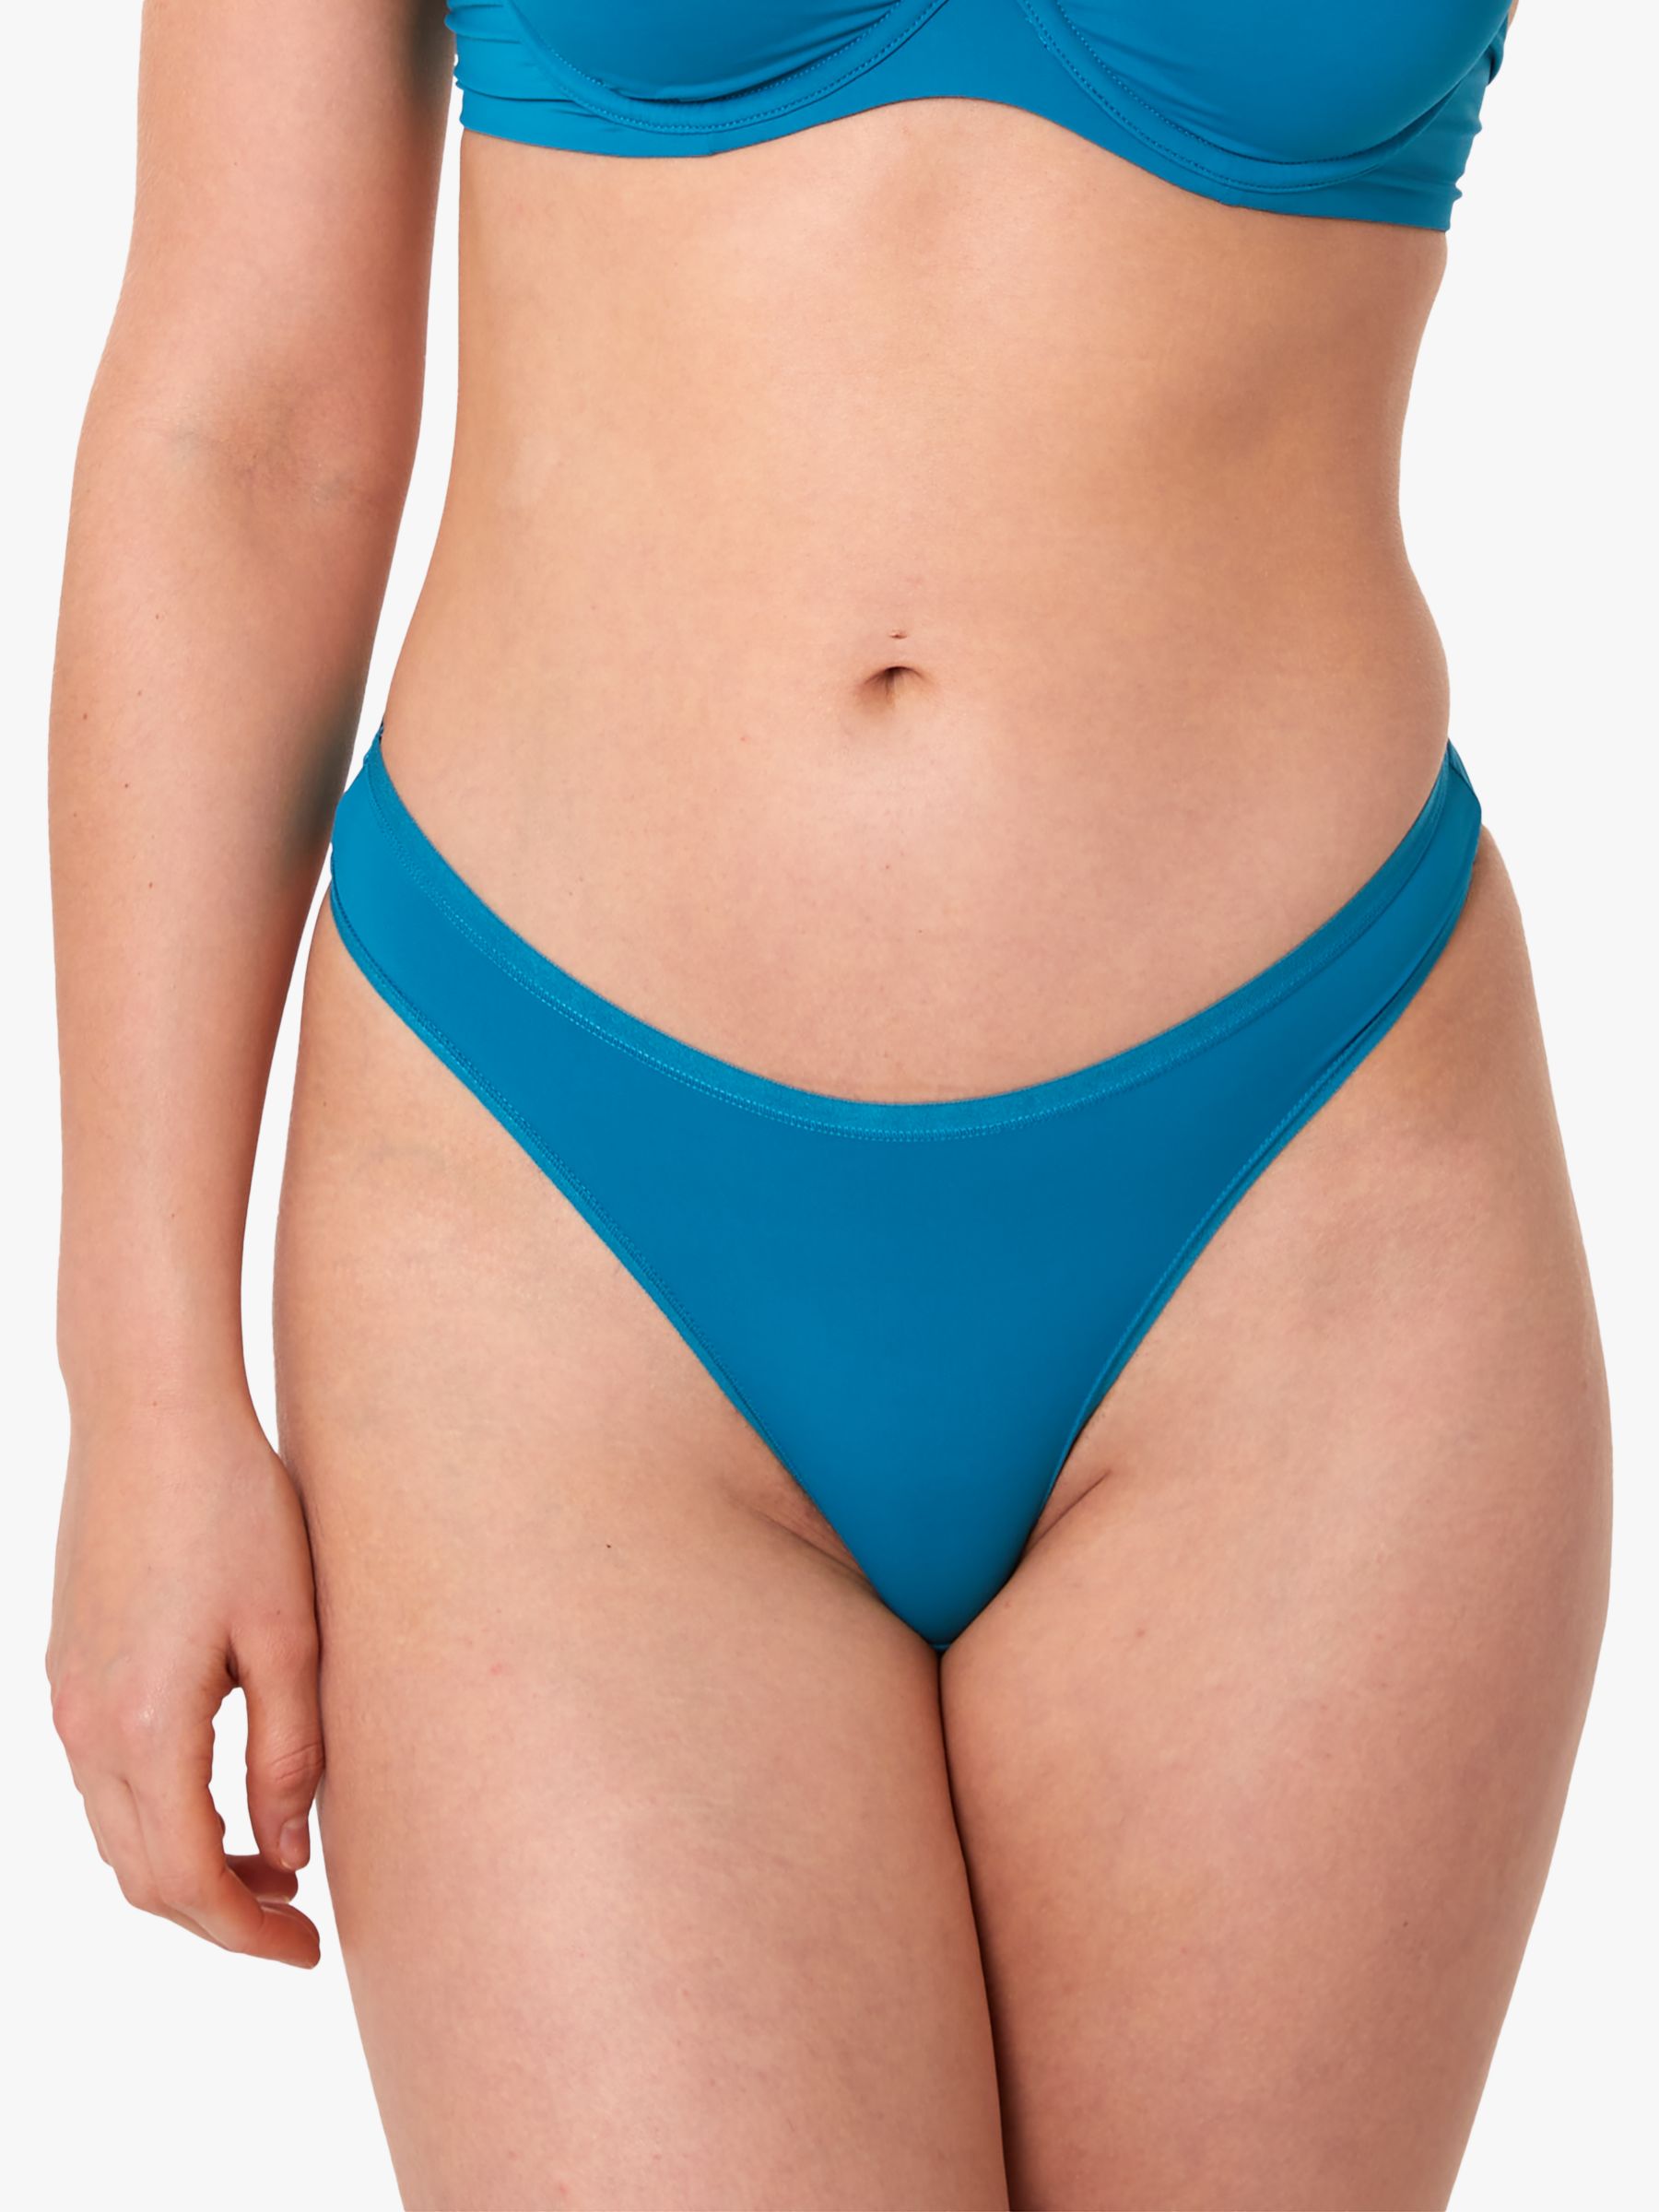 Deja Day Second Skin Eco No-VPL Thong, Teal, 8